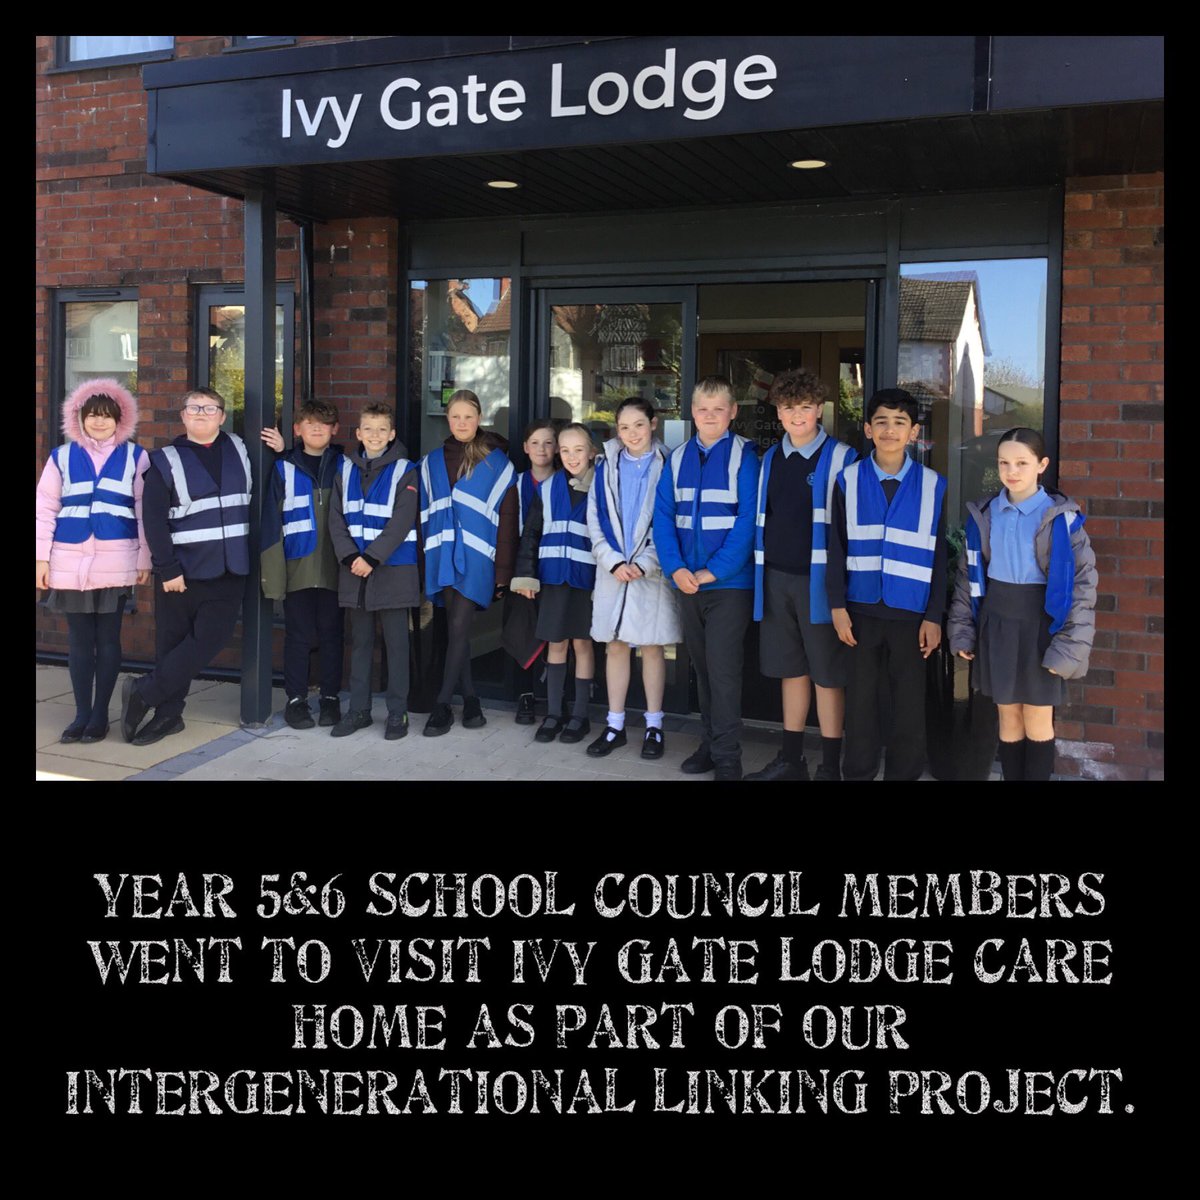 Today it was a privilege to take our Year 5 and Year 6 School Representatives on a visit to Ivy Gate Lodge Care home as part of our project on Intergenerational Linking.